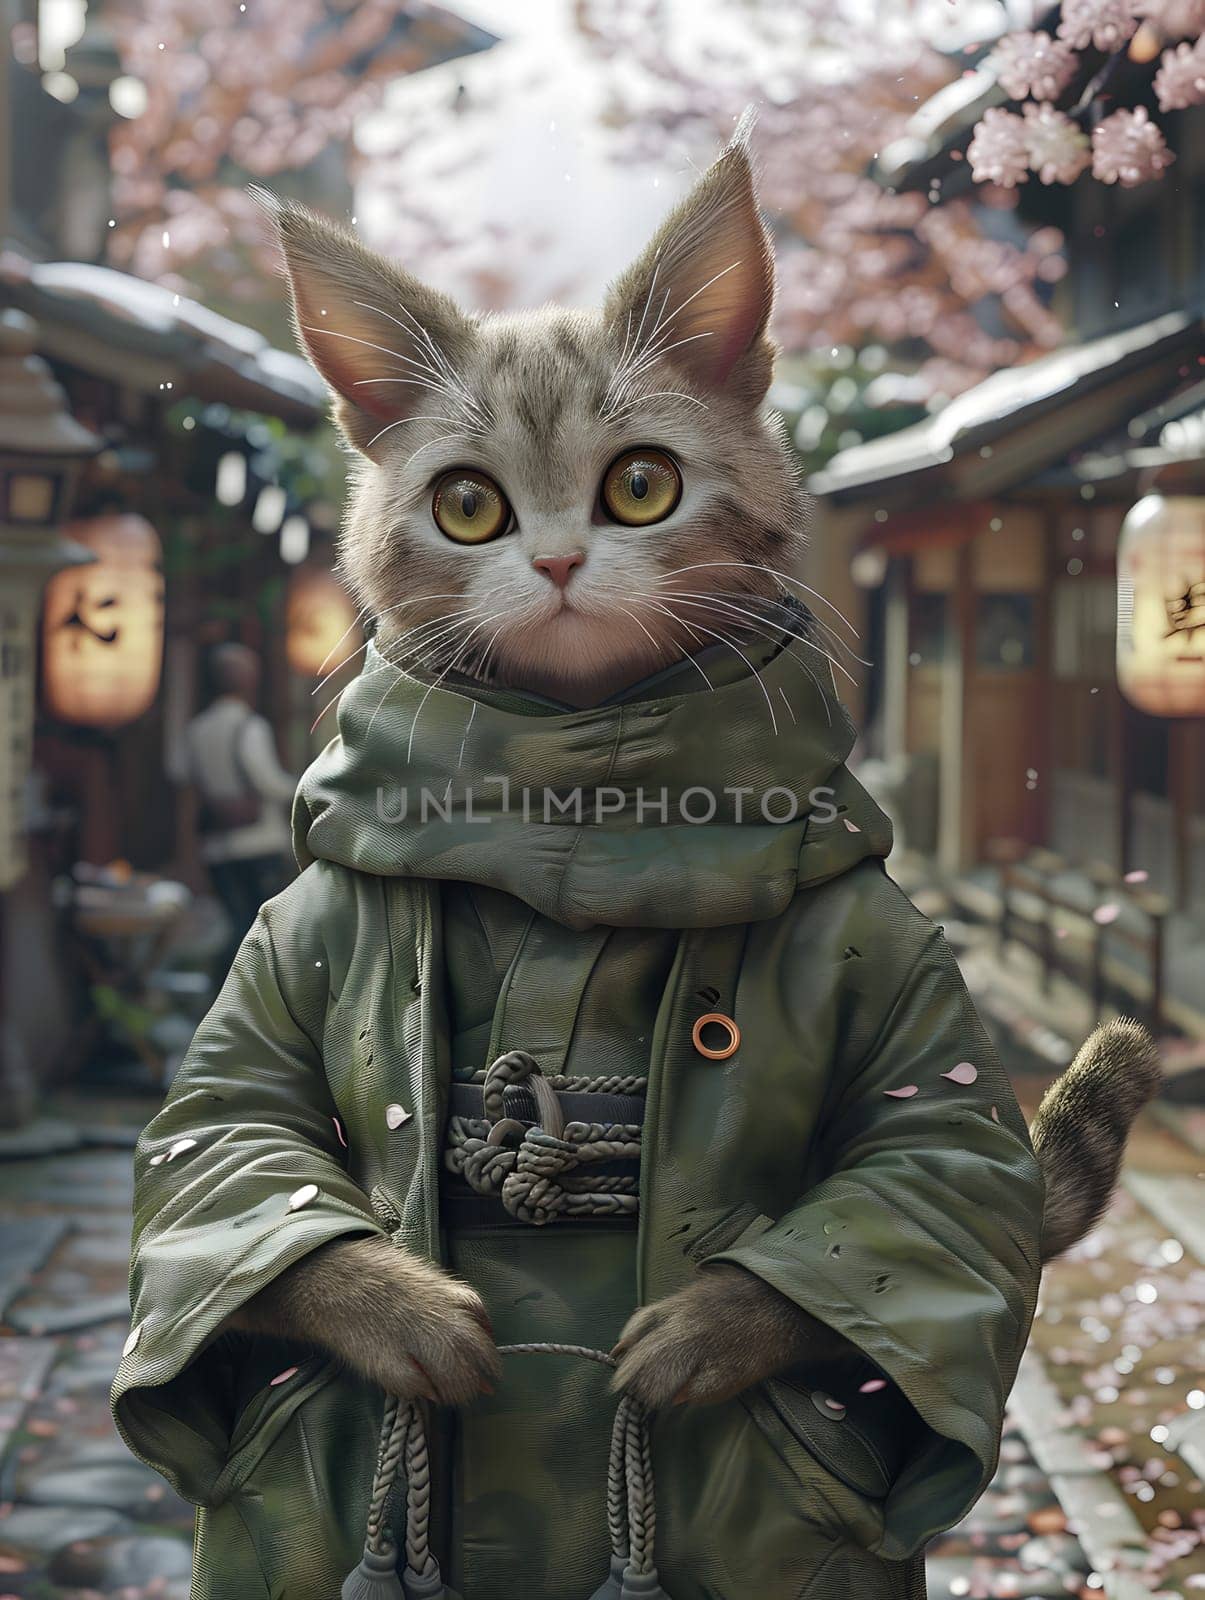 A Felidae in military camouflage kimono stands on the sidewalk, showcasing its carnivore instinct. Its small size and whiskers add to the fierce gesture